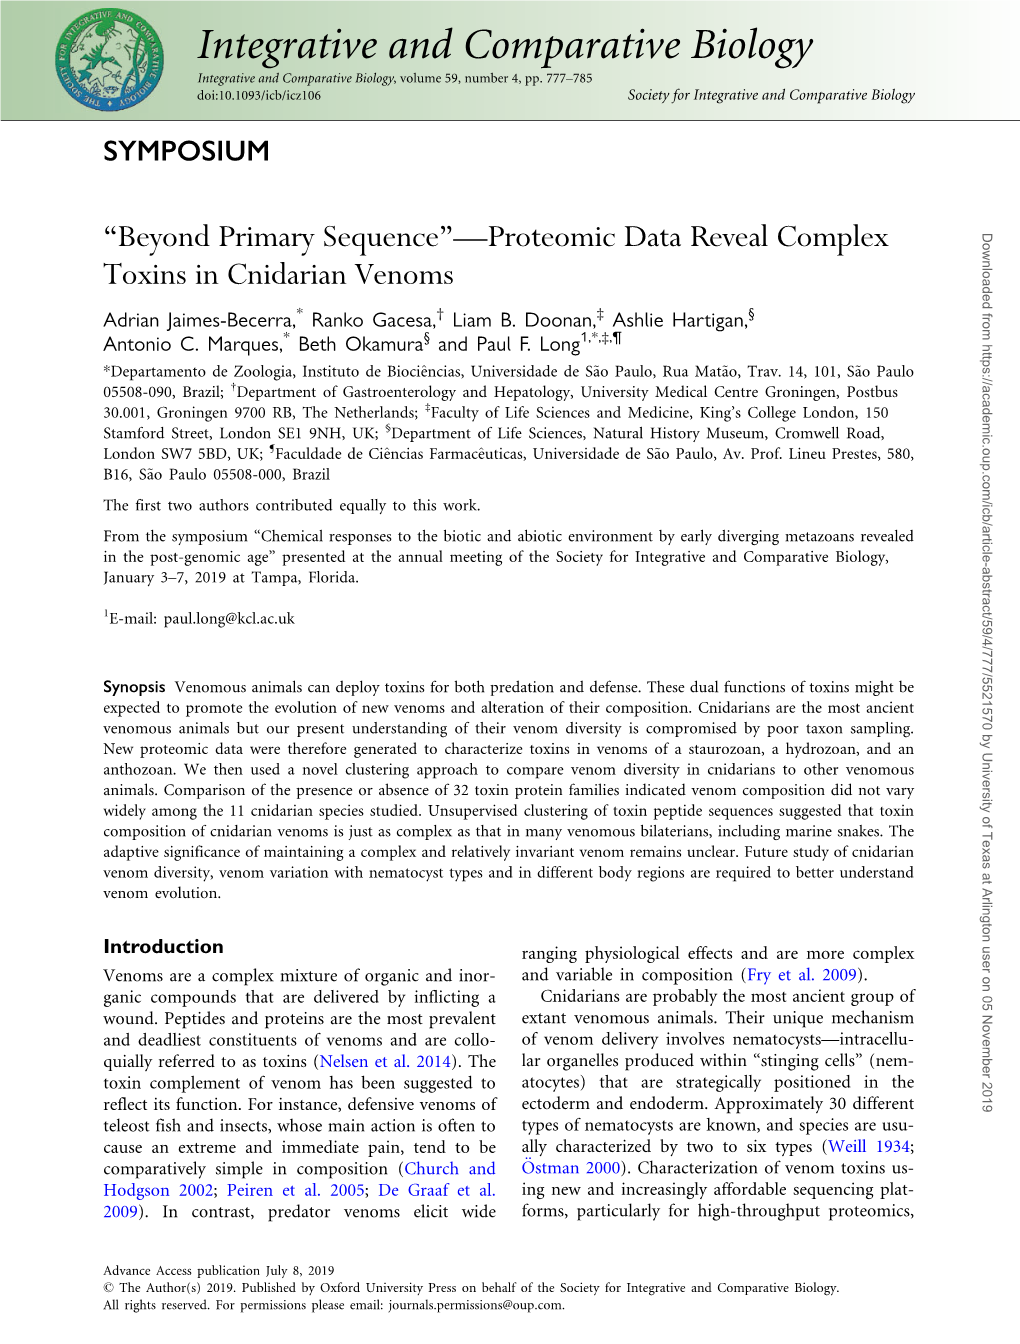 “Beyond Primary Sequence”—Proteomic Data Reveal Complex